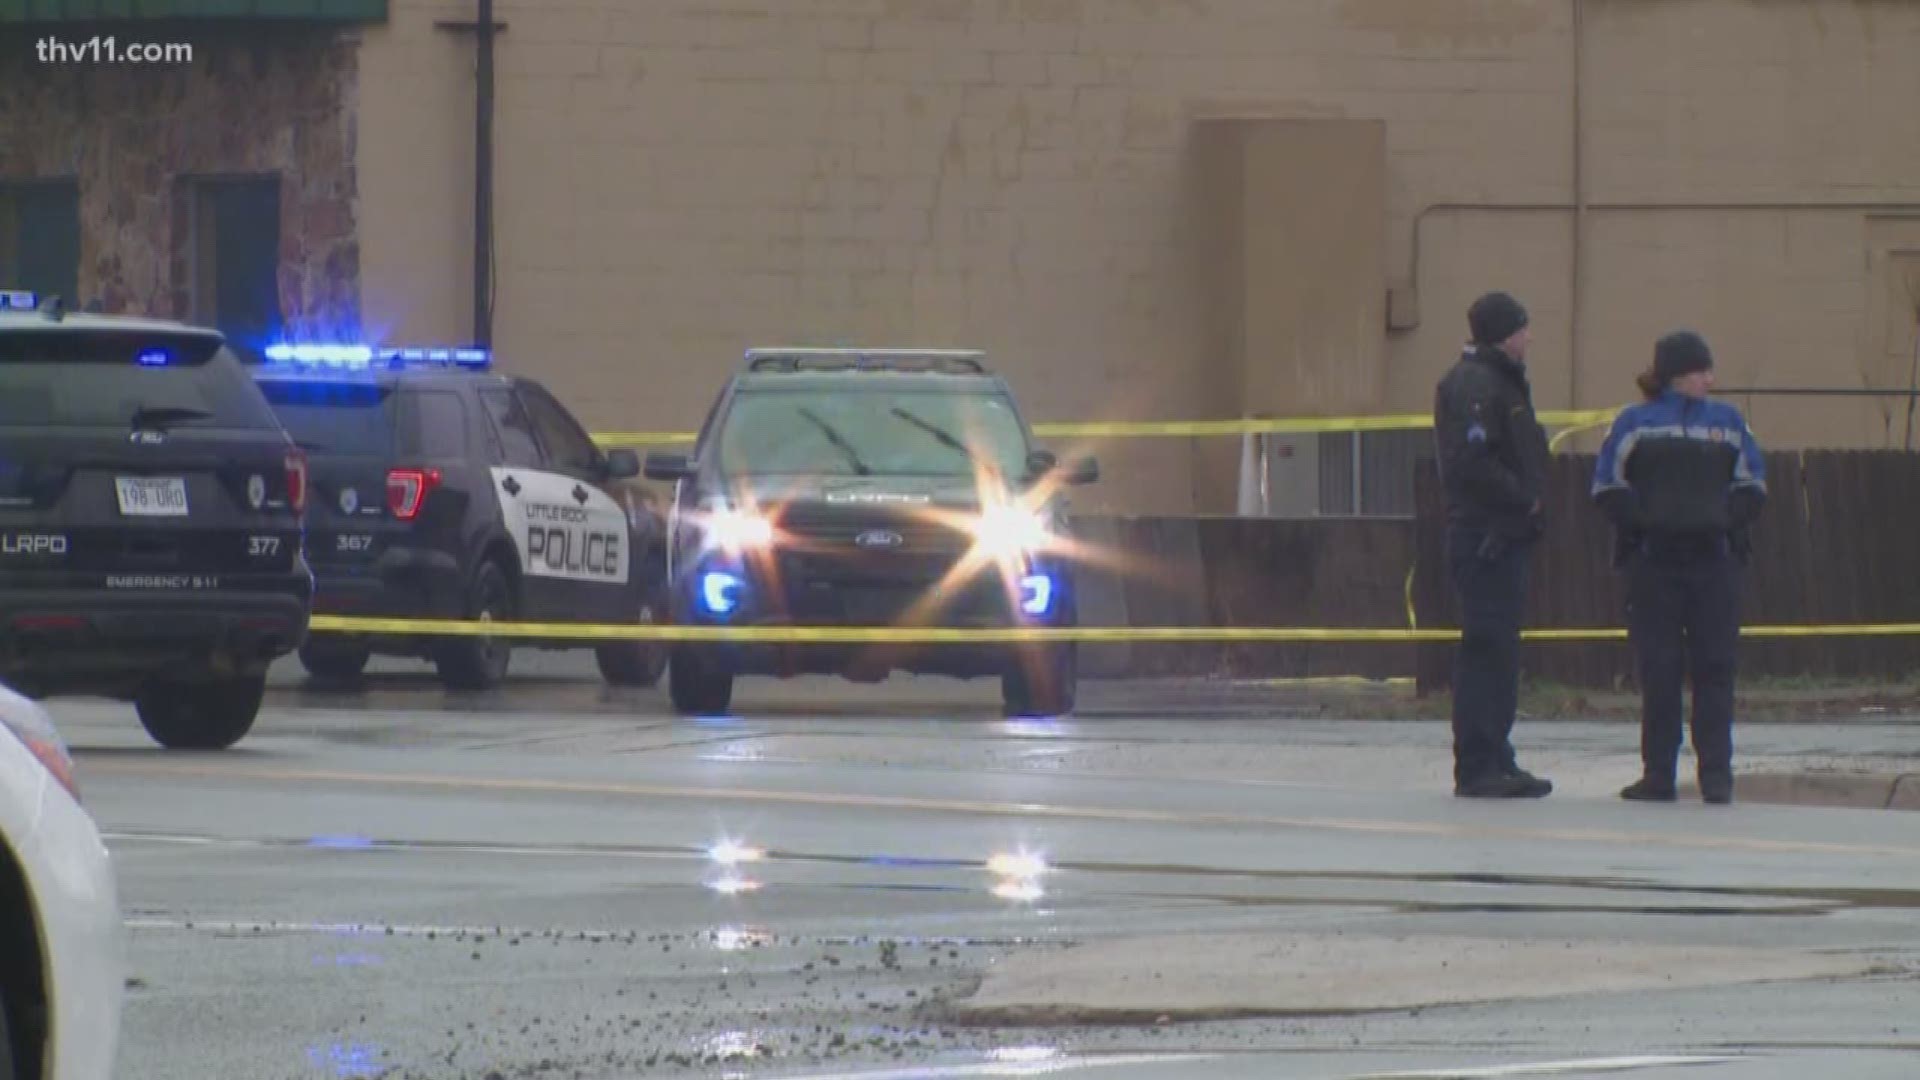 A police officer shoots and kills the driver of a stolen vehicle and says it was self-defense.